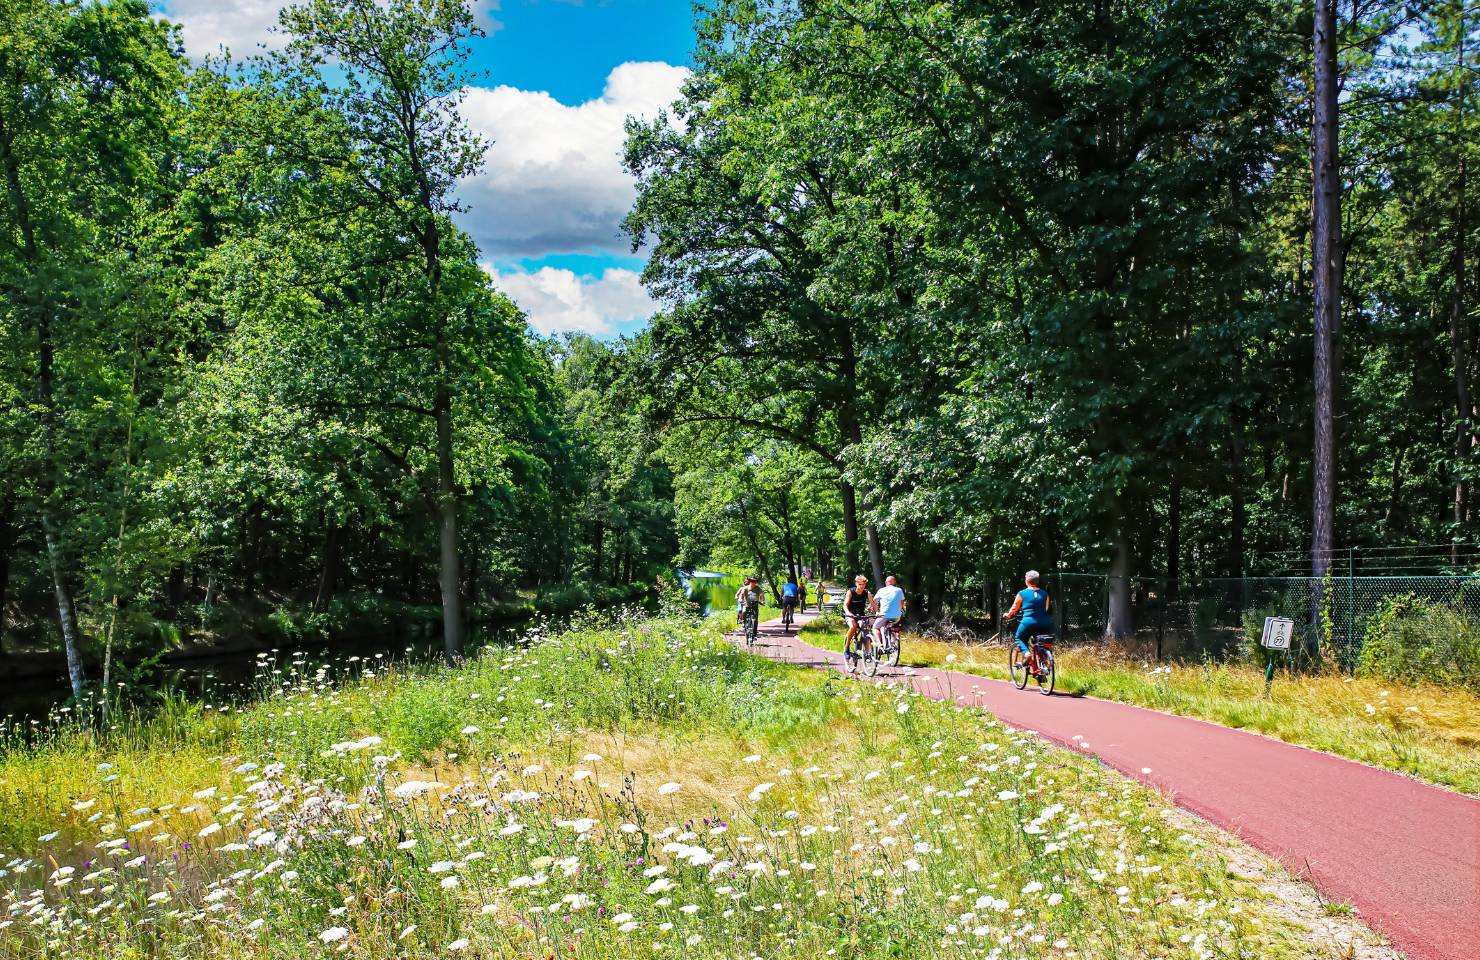 Cyclists go through a meadow in Eindhoven